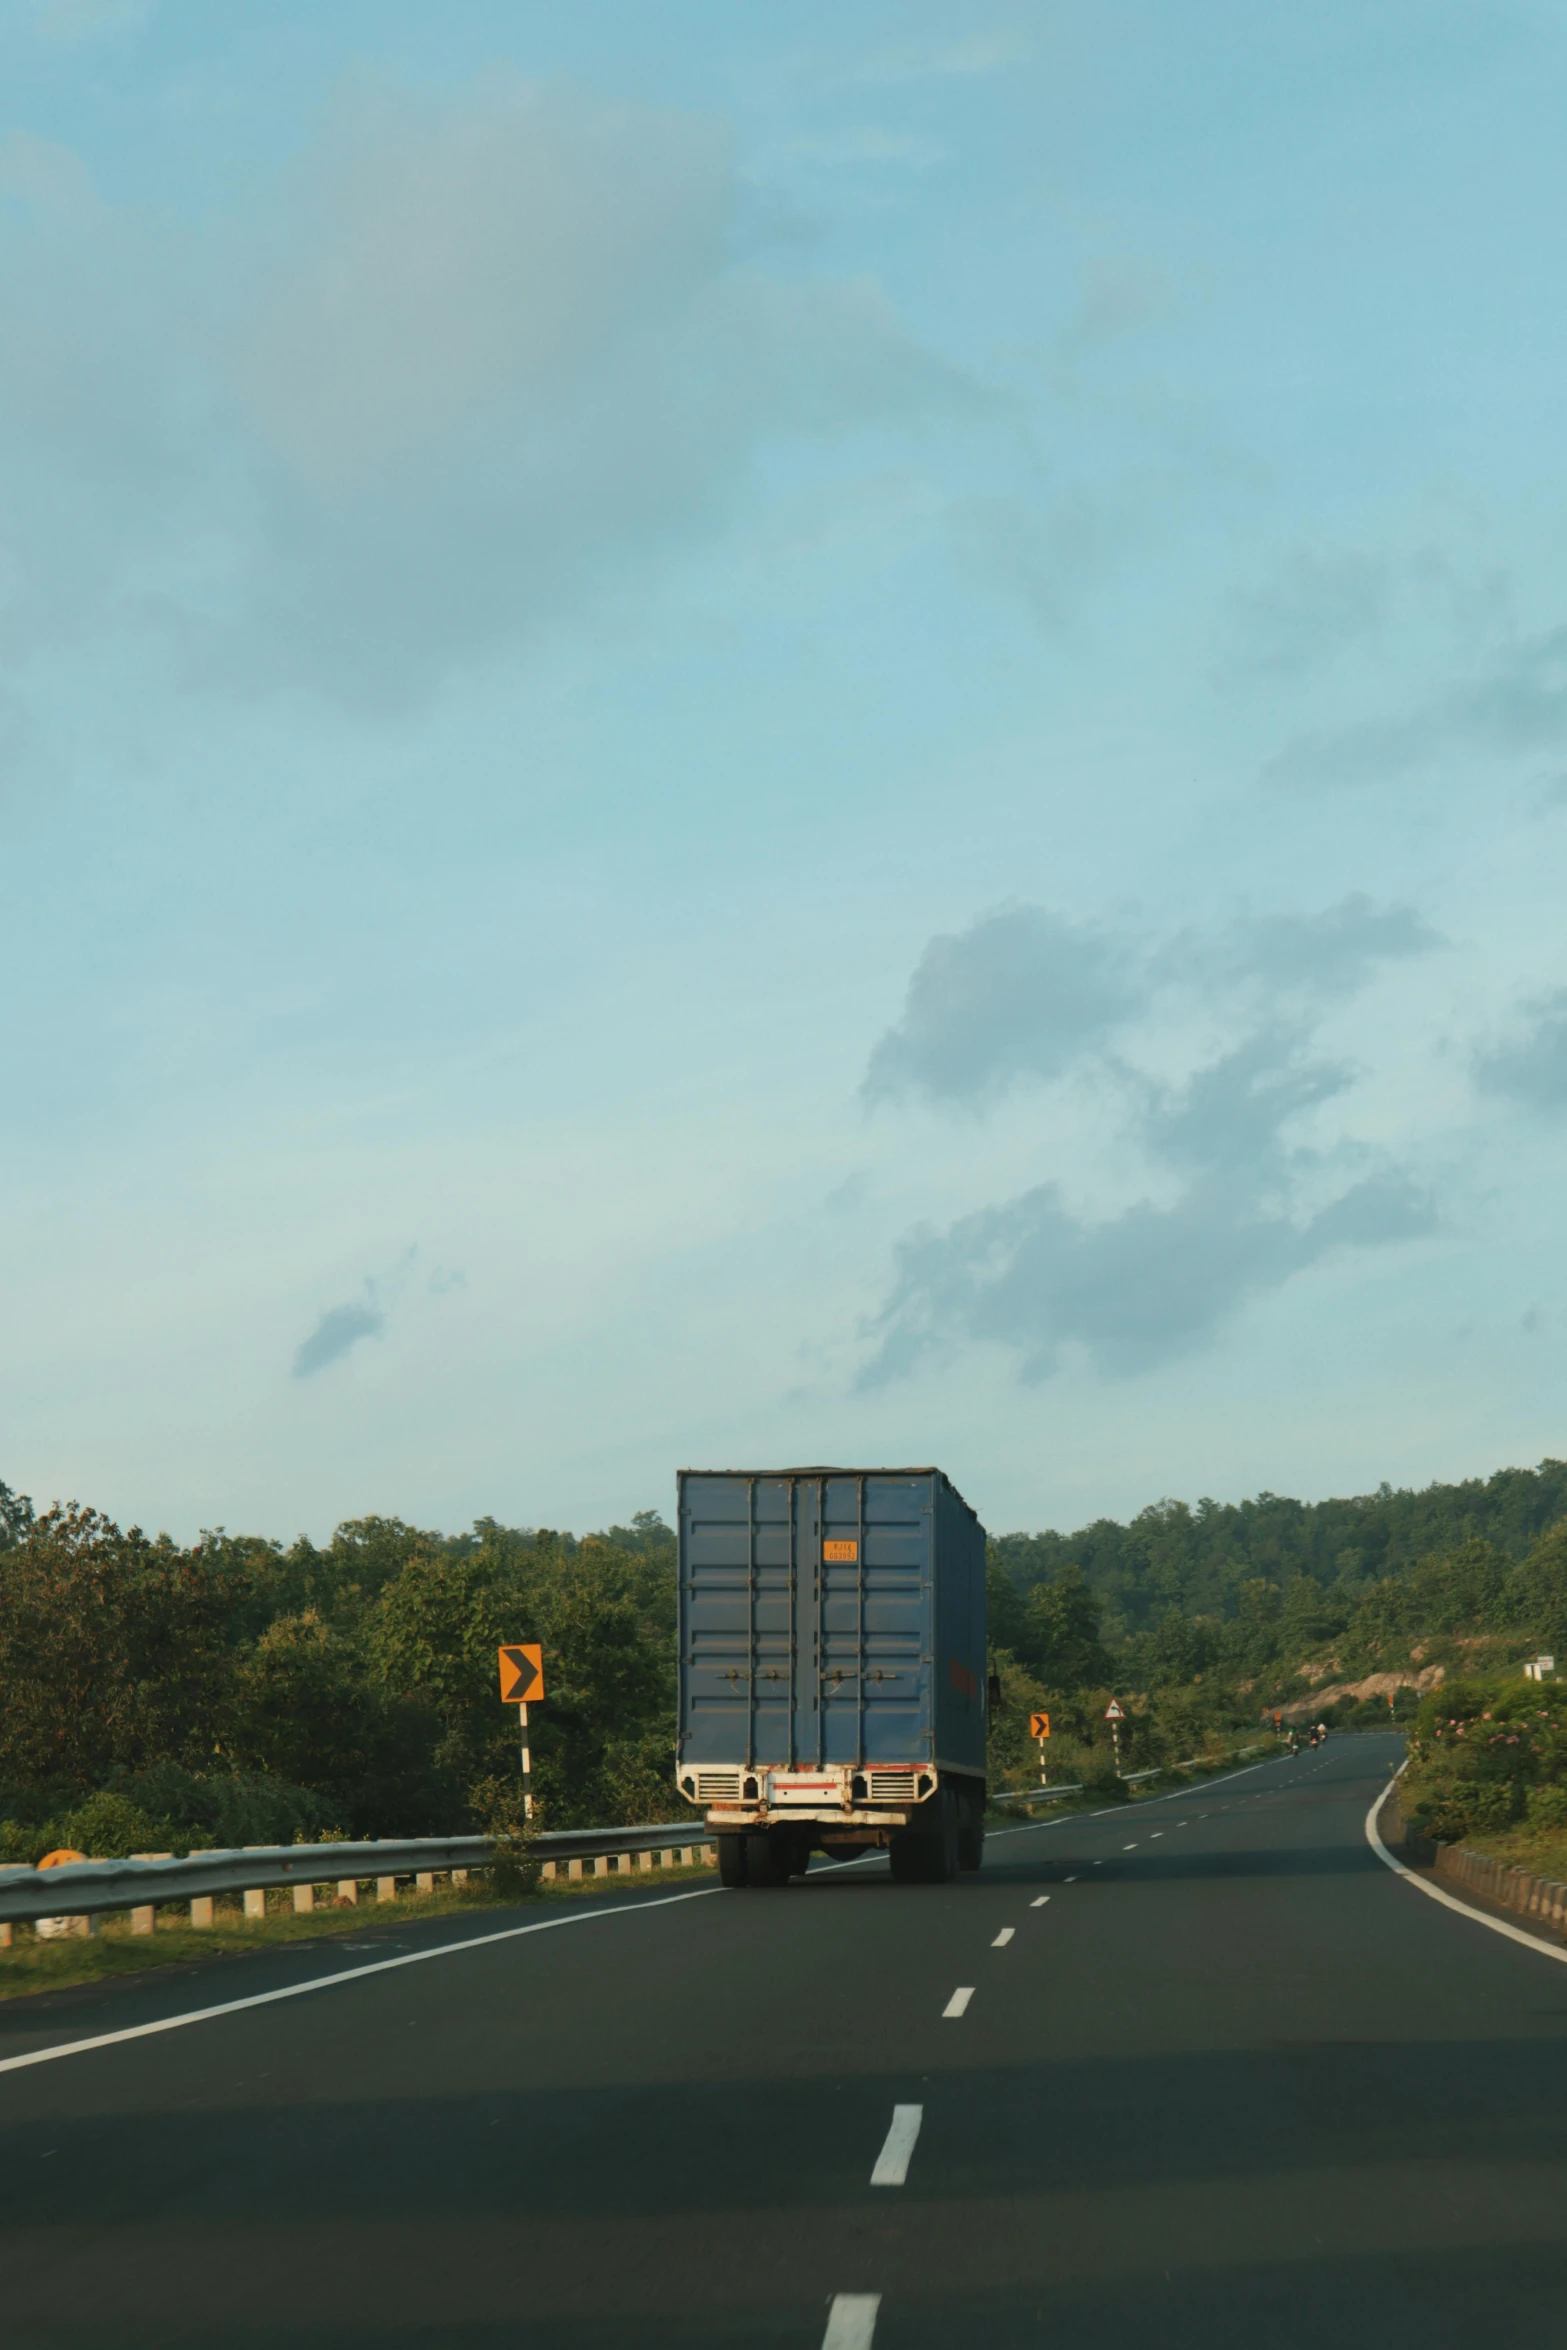 a truck driving on the highway, with trees in the background